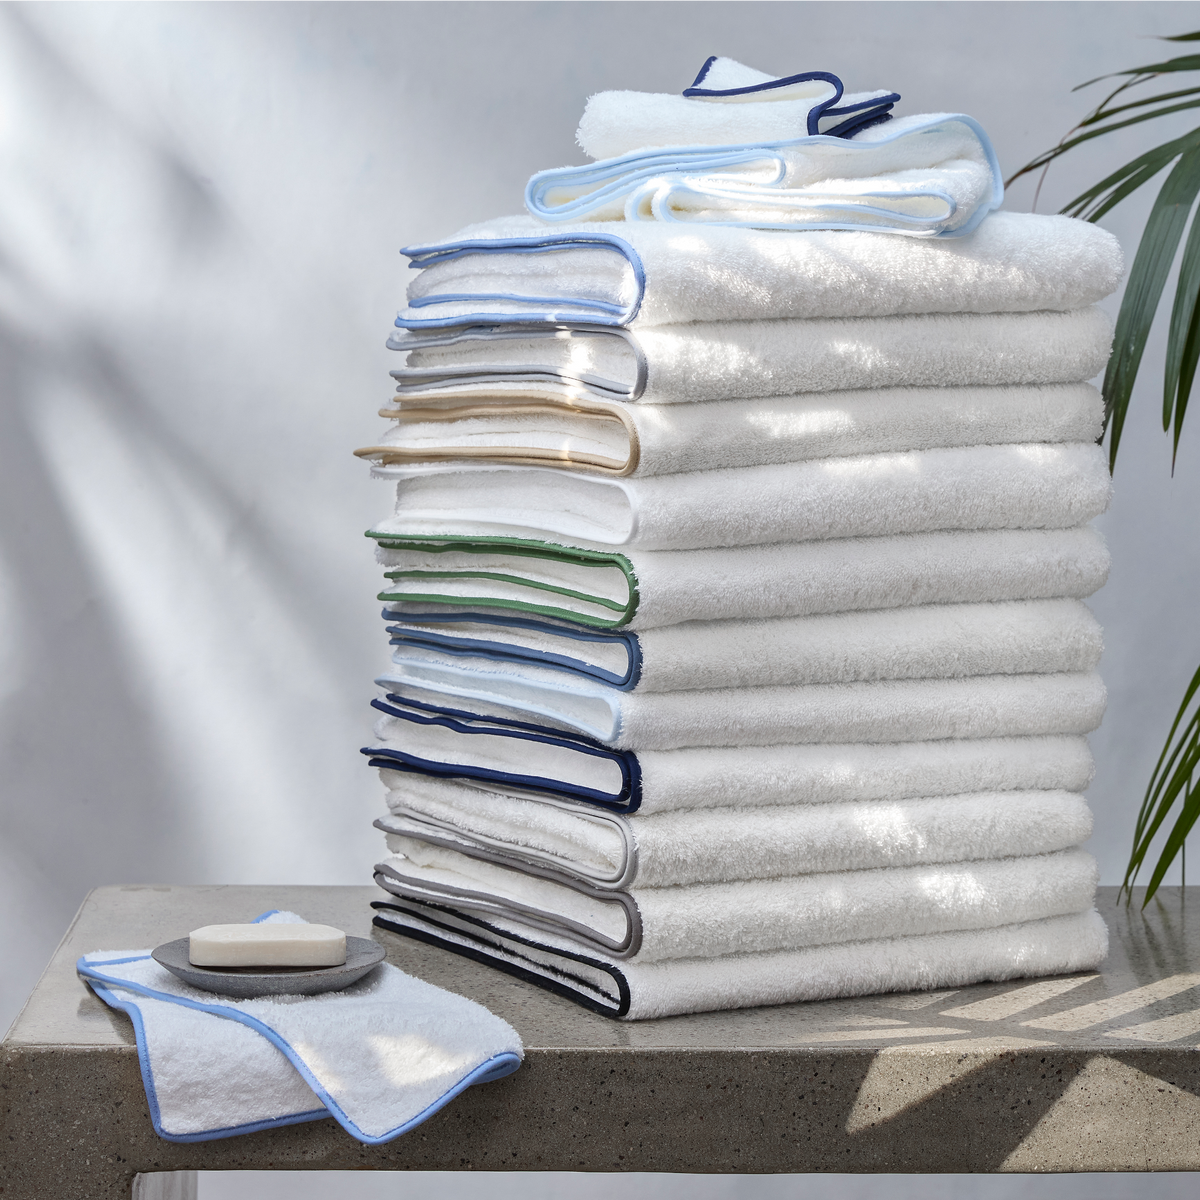 Stack of New Solid Colors of Matouk Cairo Bath Towels Released in 2023